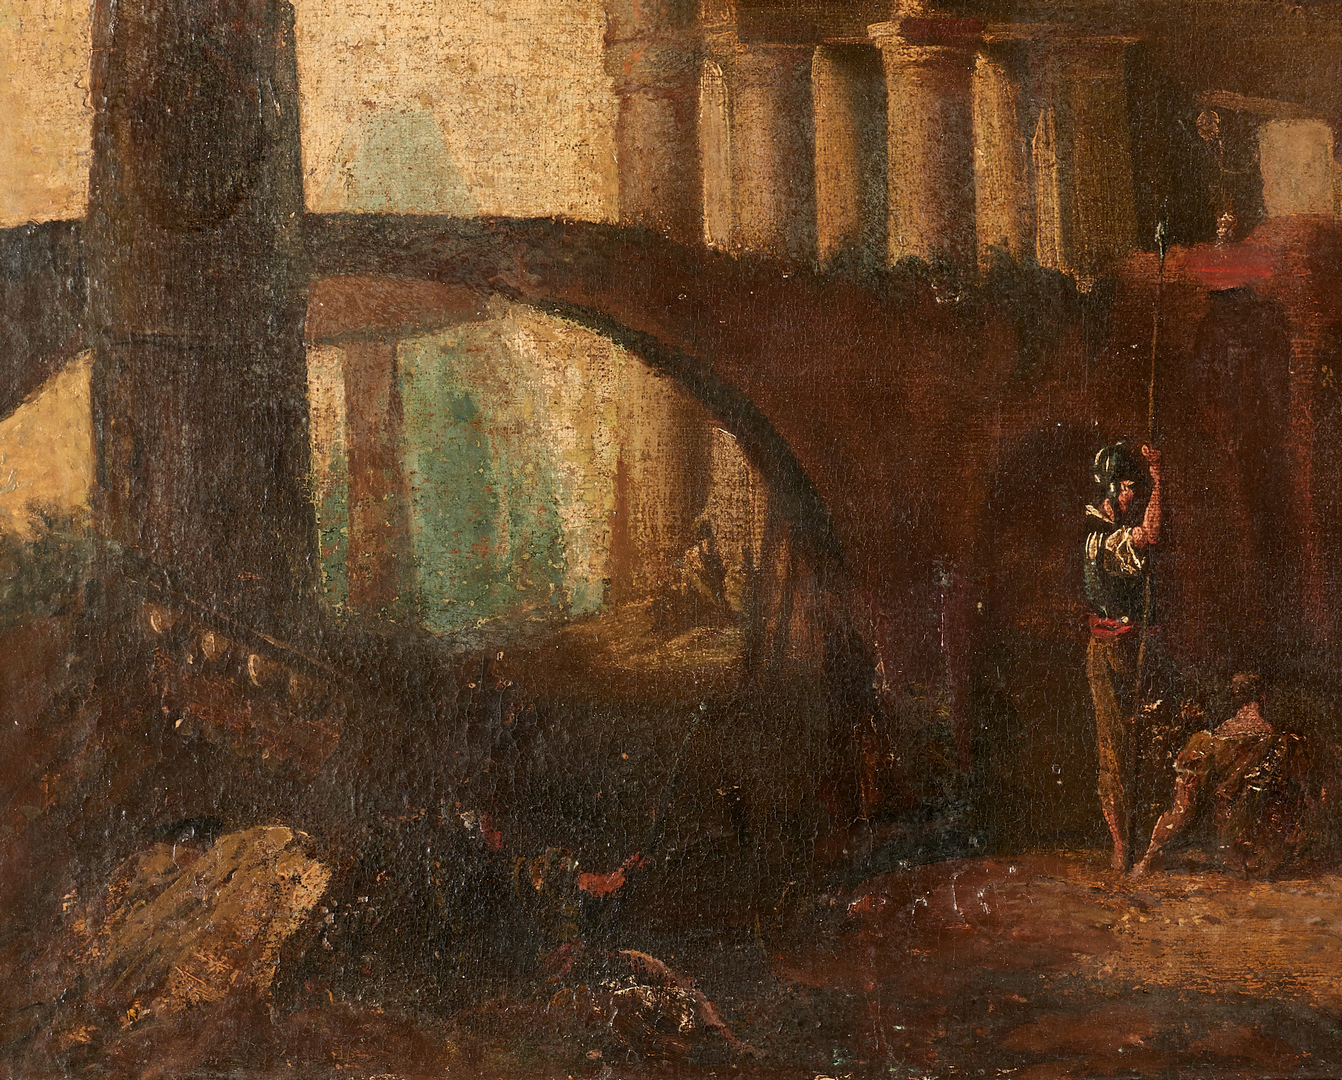 Lot 99: Style of Hubert Robert, 18th C. Landscape with Roman Ruins and 3 figures